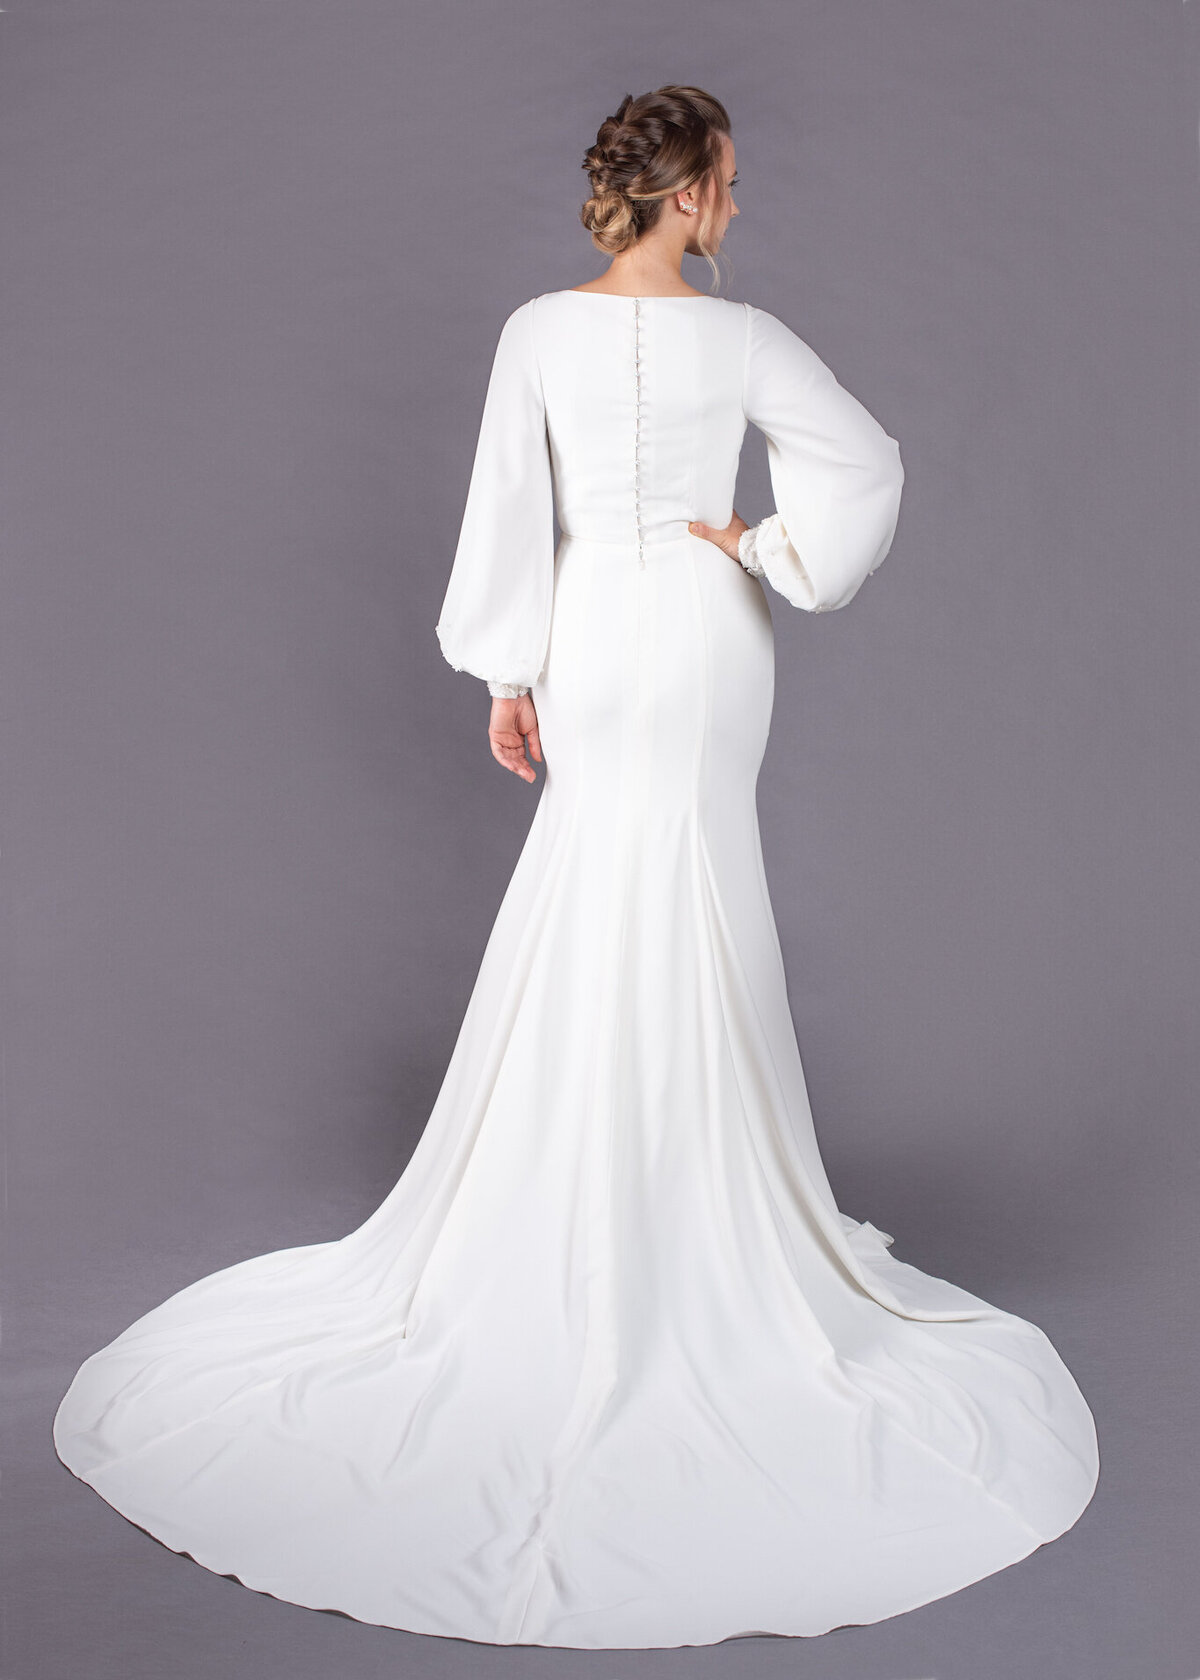 Pearl buttons close the high back on the Milly wedding dress style. The fit and flare skirt features a simple cathedral train.